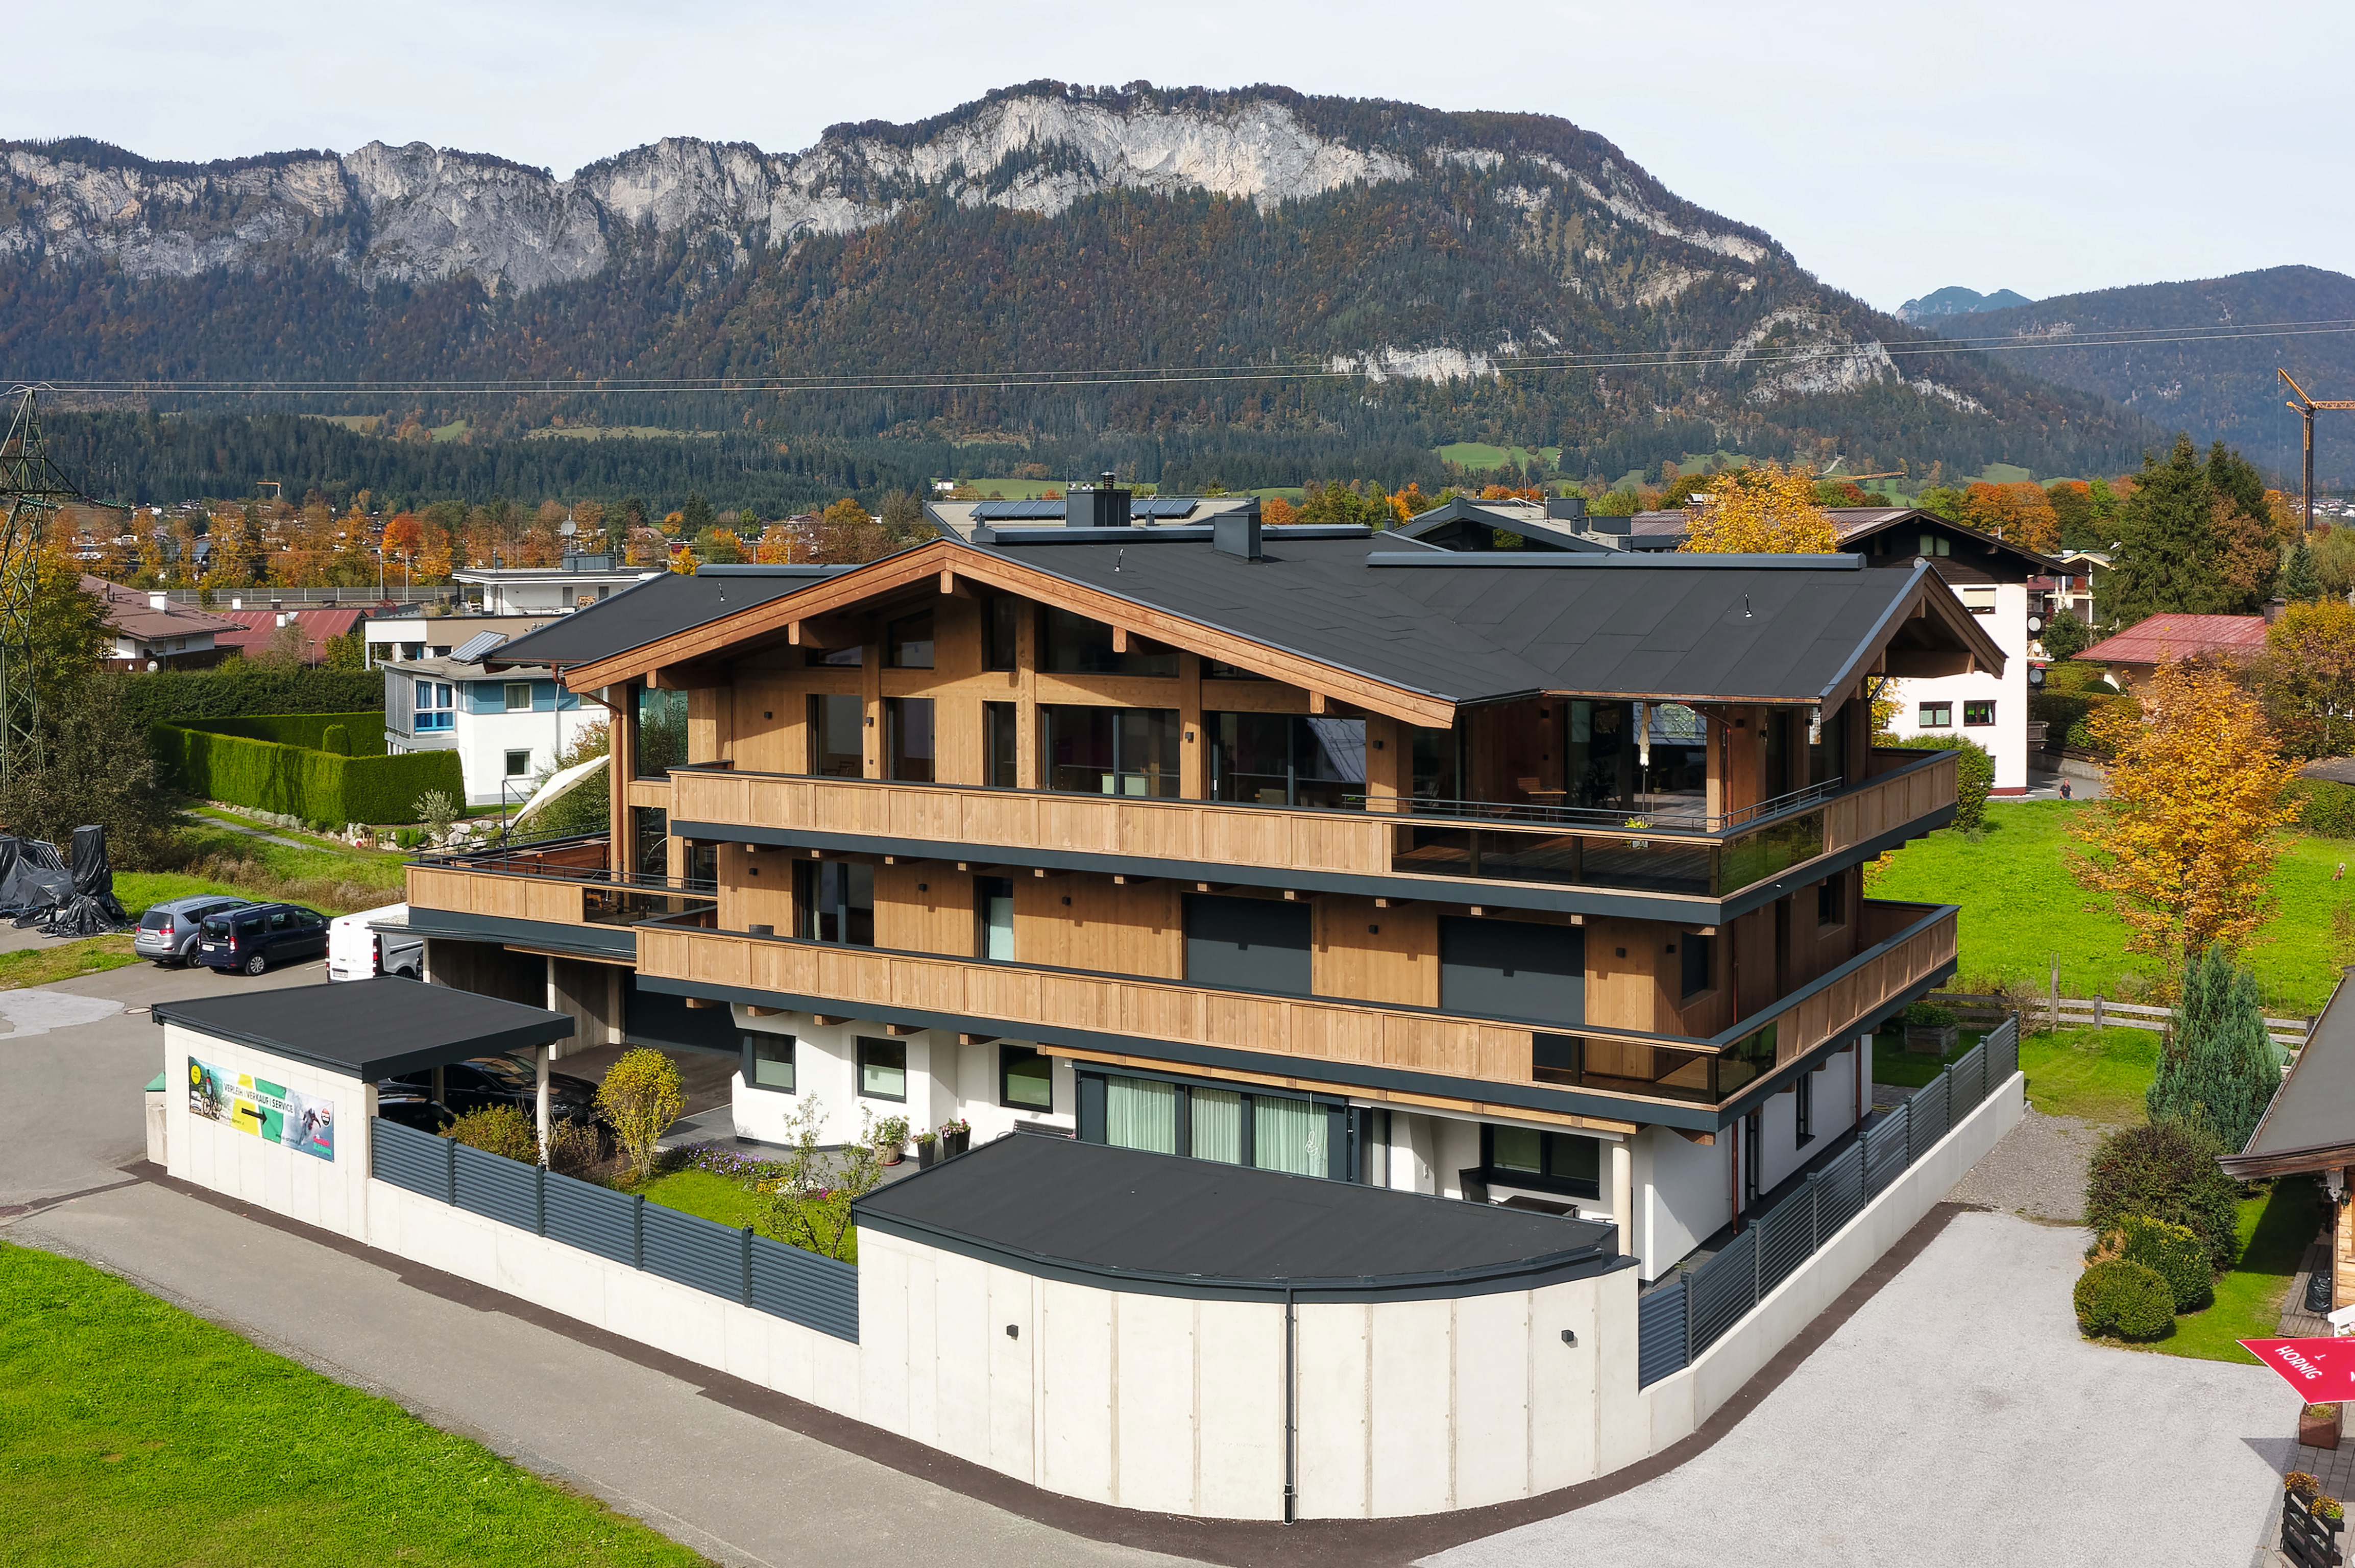 A single-family house was converted into a multi-family house in St. Johann in Tirol.